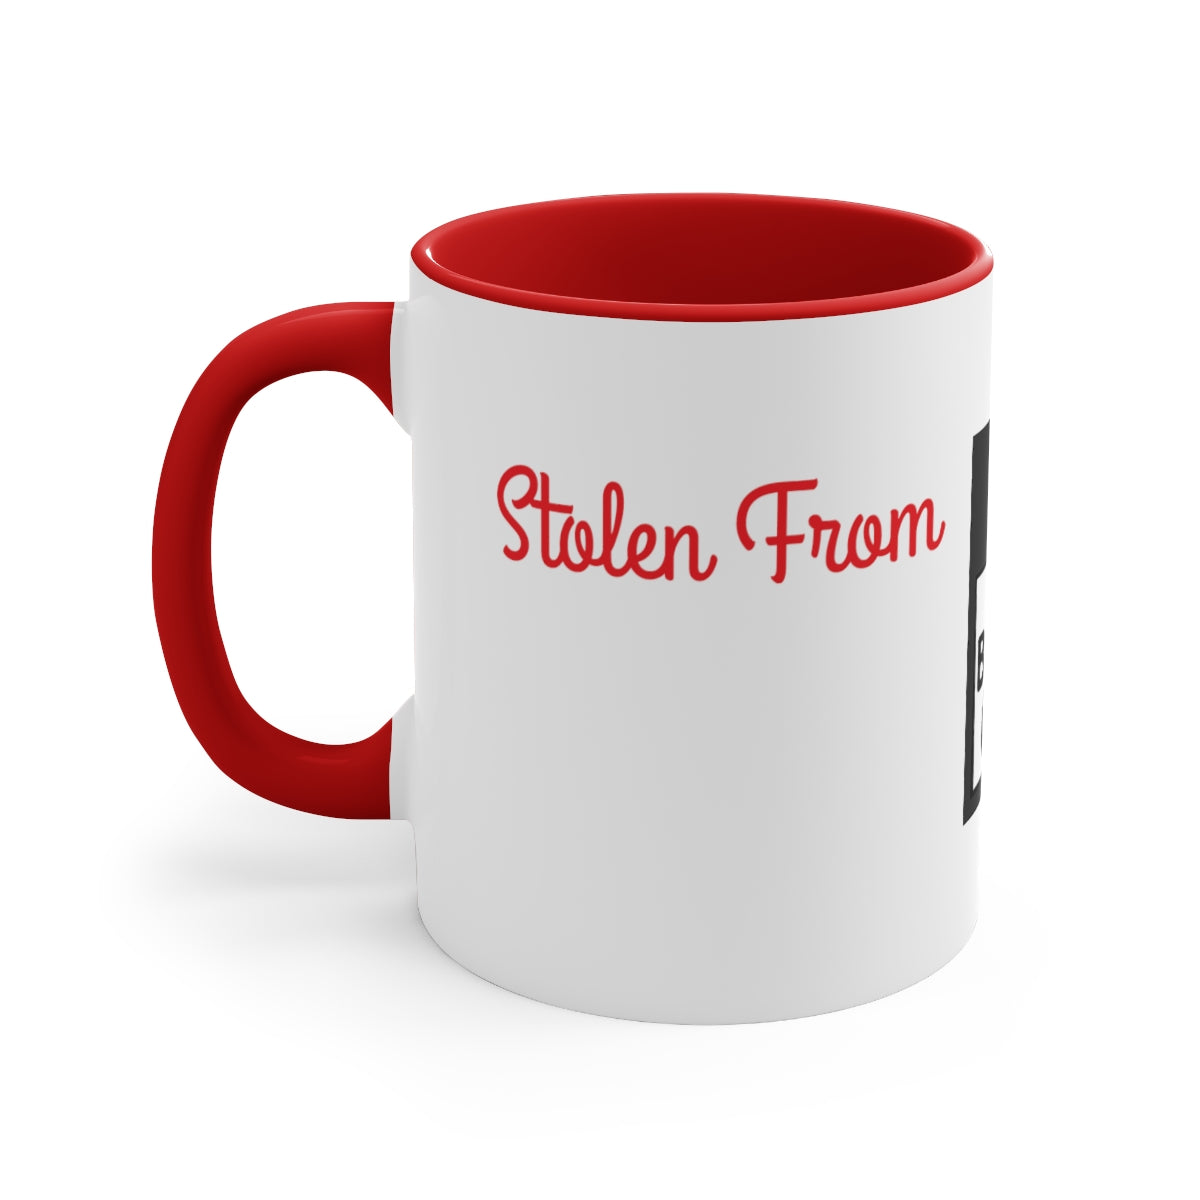 Stolen from The Black Cat Accent Coffee Mug, 11oz